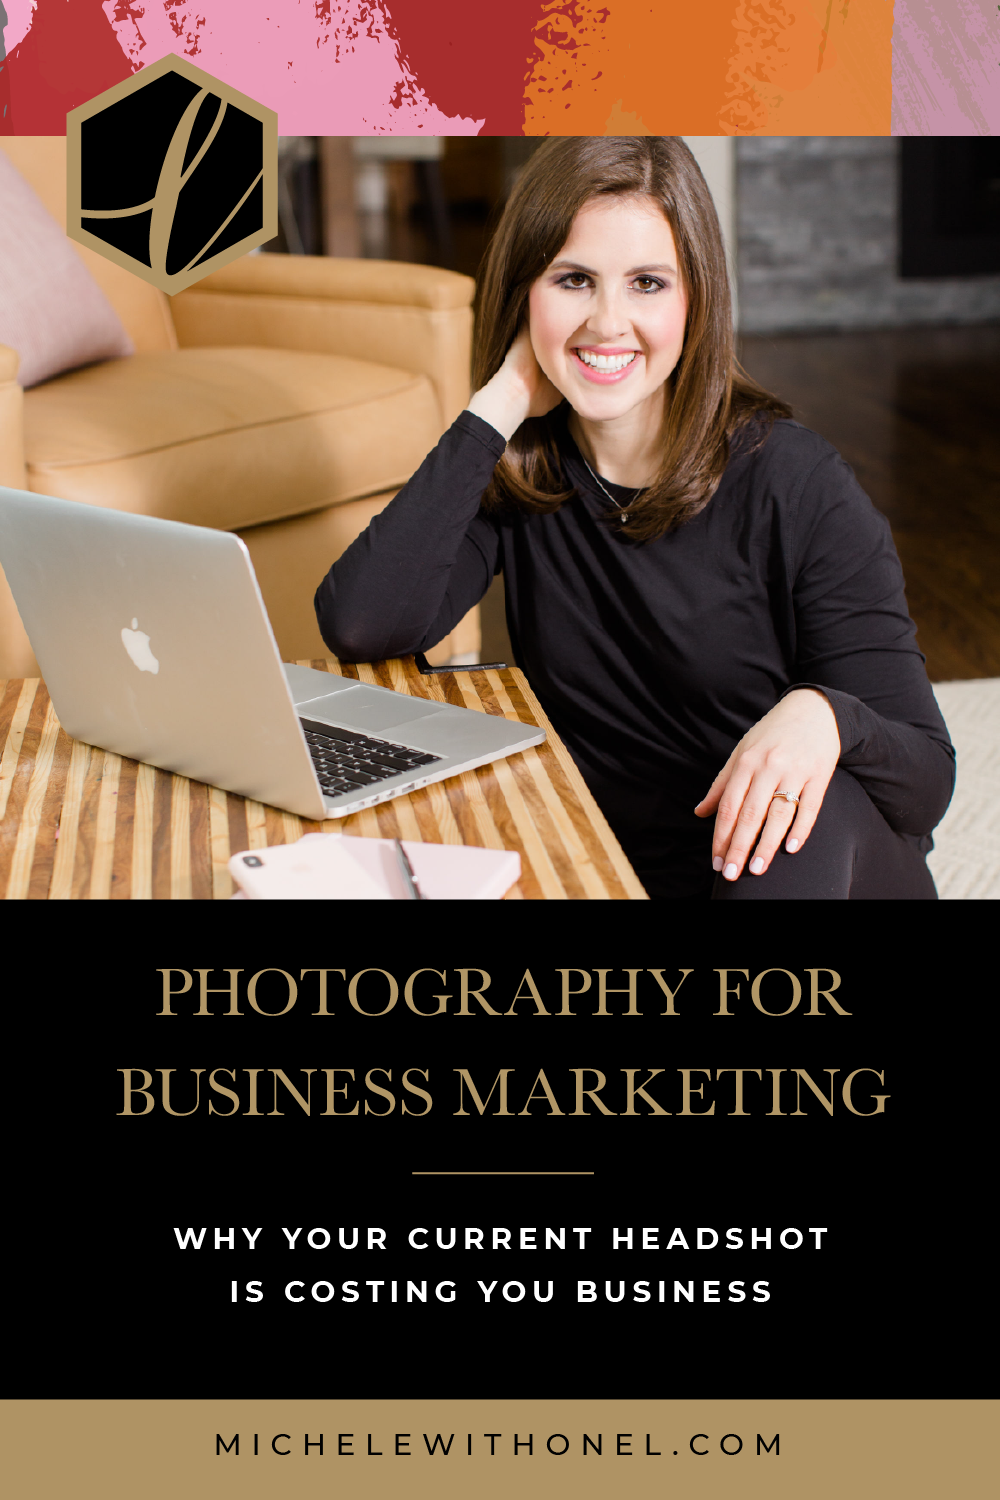 Wondering why photography for business marketing is so important? This post is for you! You will learn some business marketing strategies to help you stand out from the crowd, how to make a good first impression online, and why you need updated headshots. #business #marketing #branding #photography